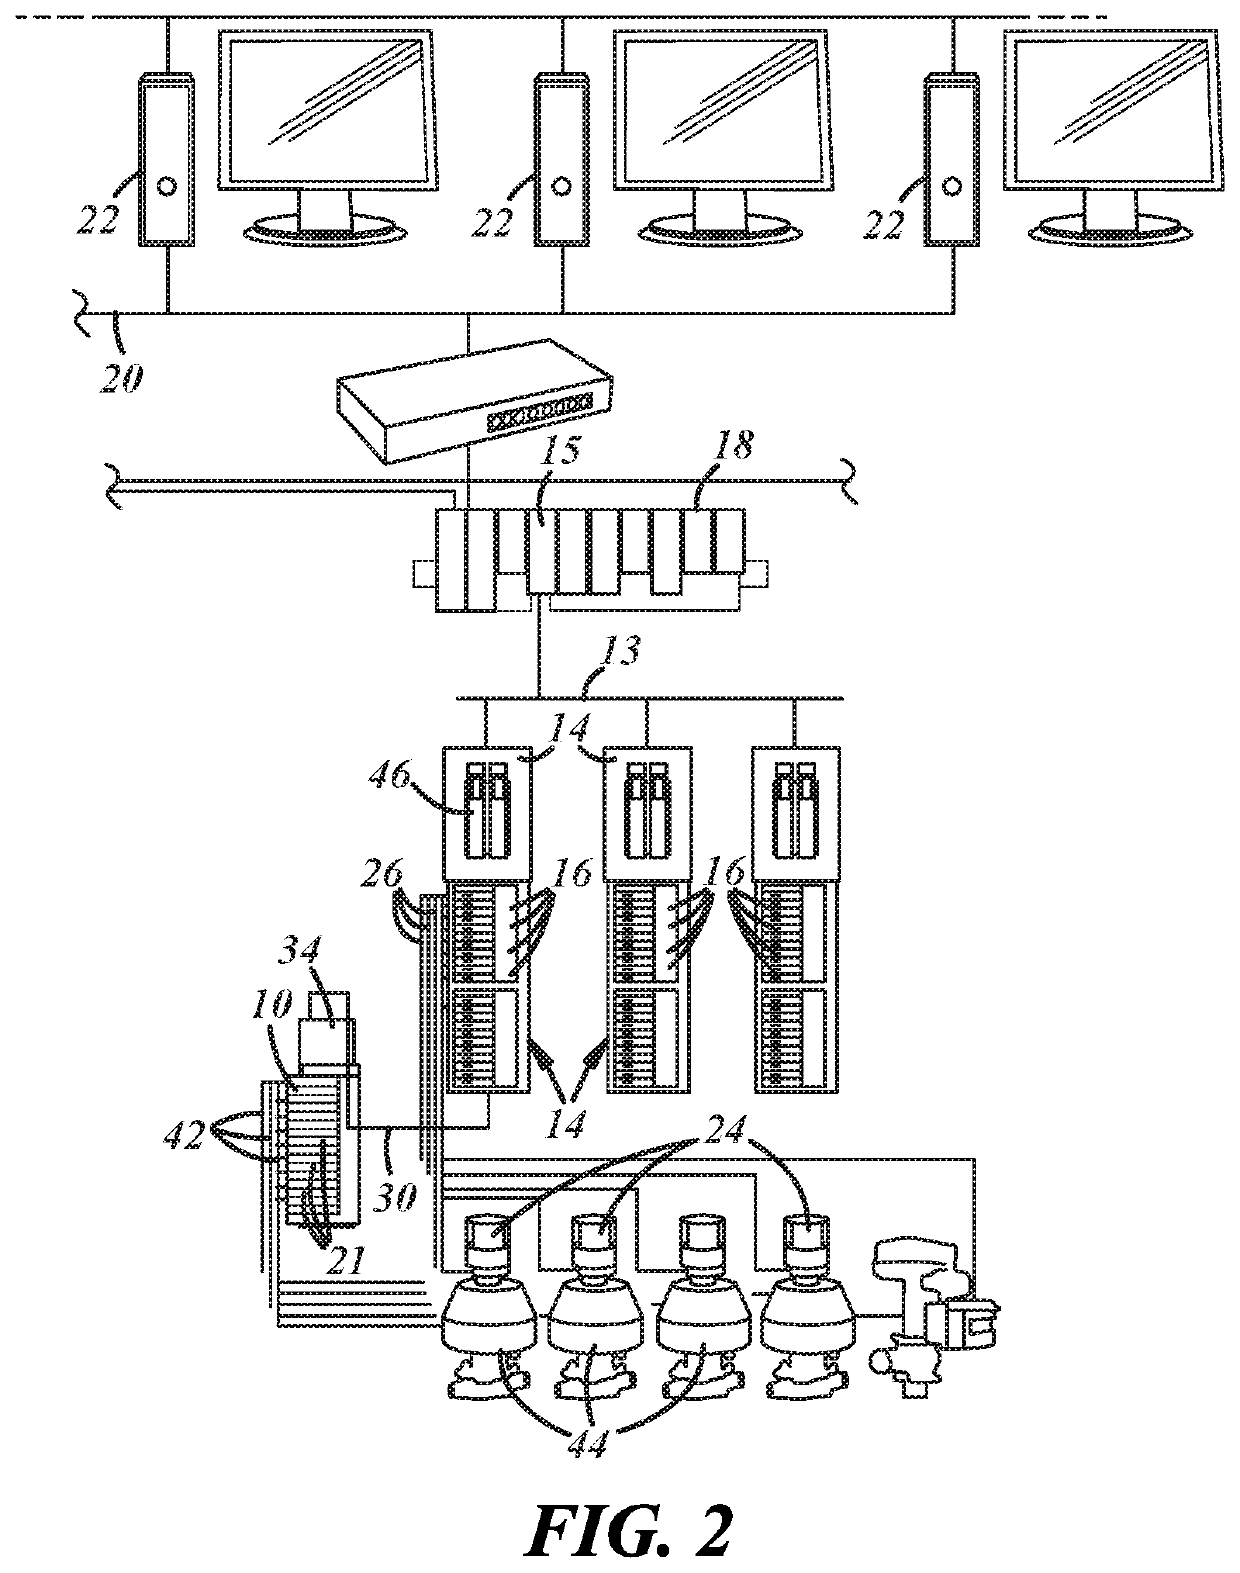 Valve manifold serially mounted to a distributed control system assembly